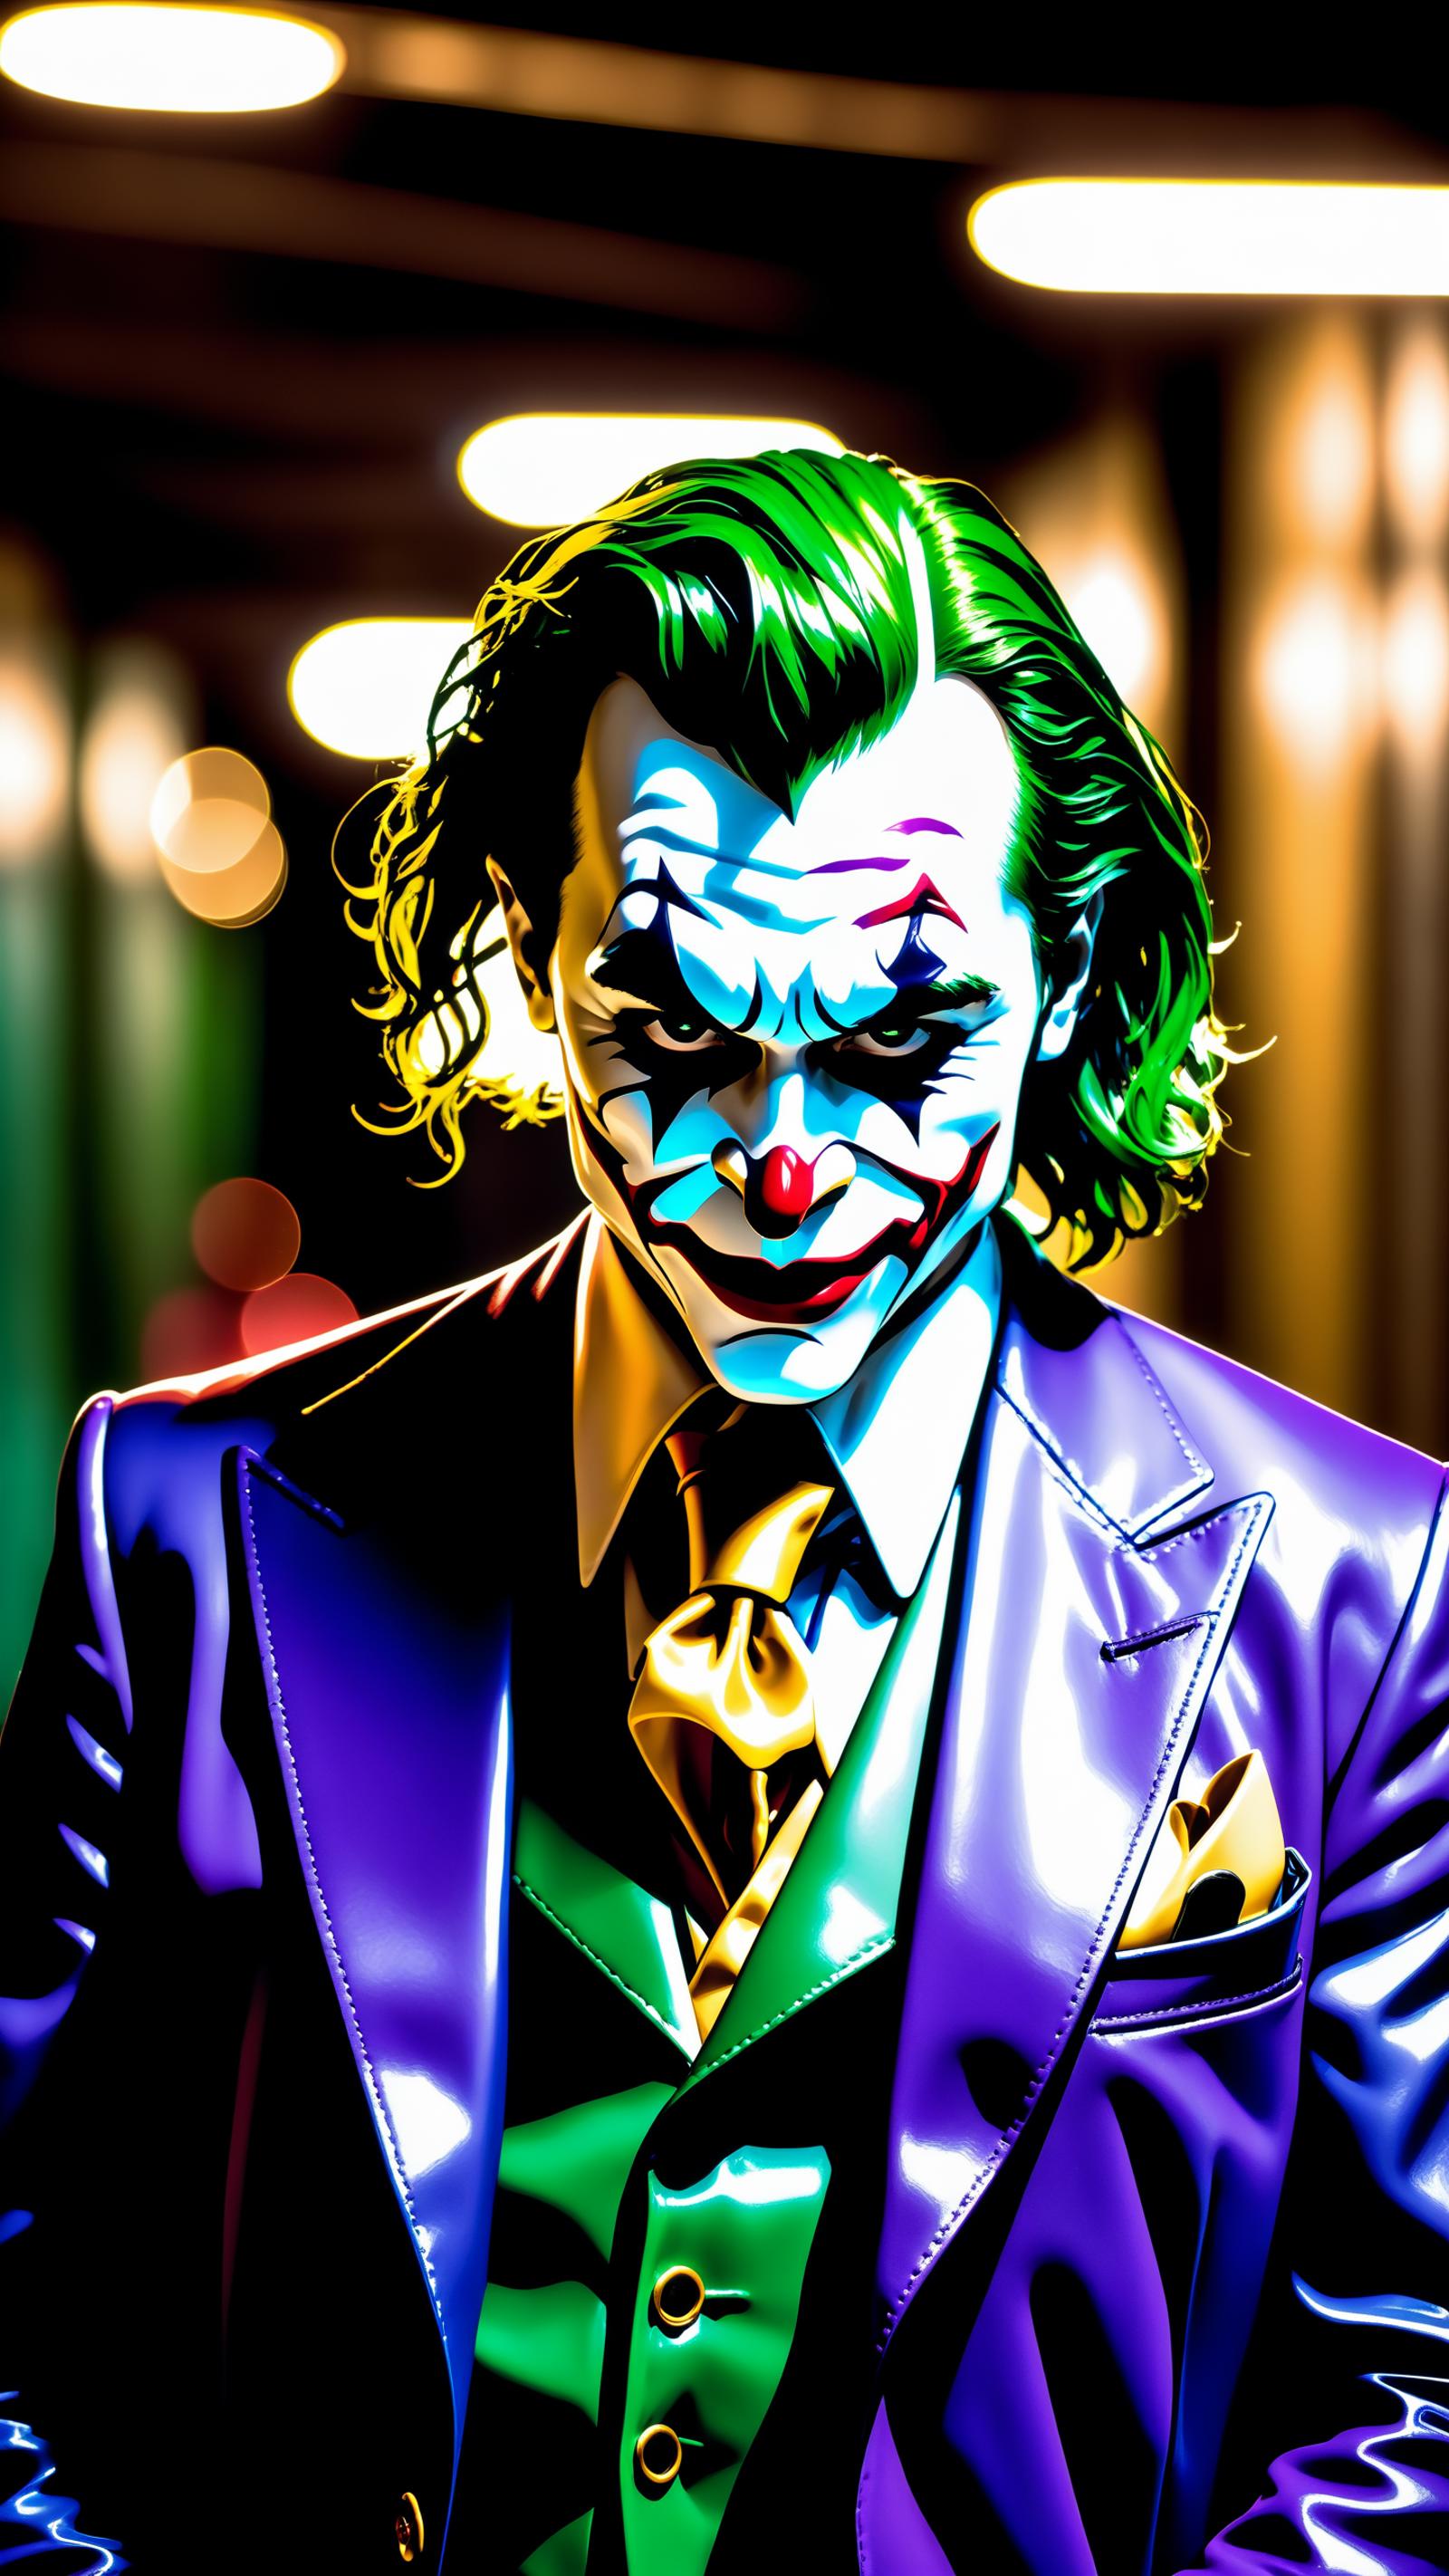 A detailed, colorful image of the character Joker from the movie Batman.